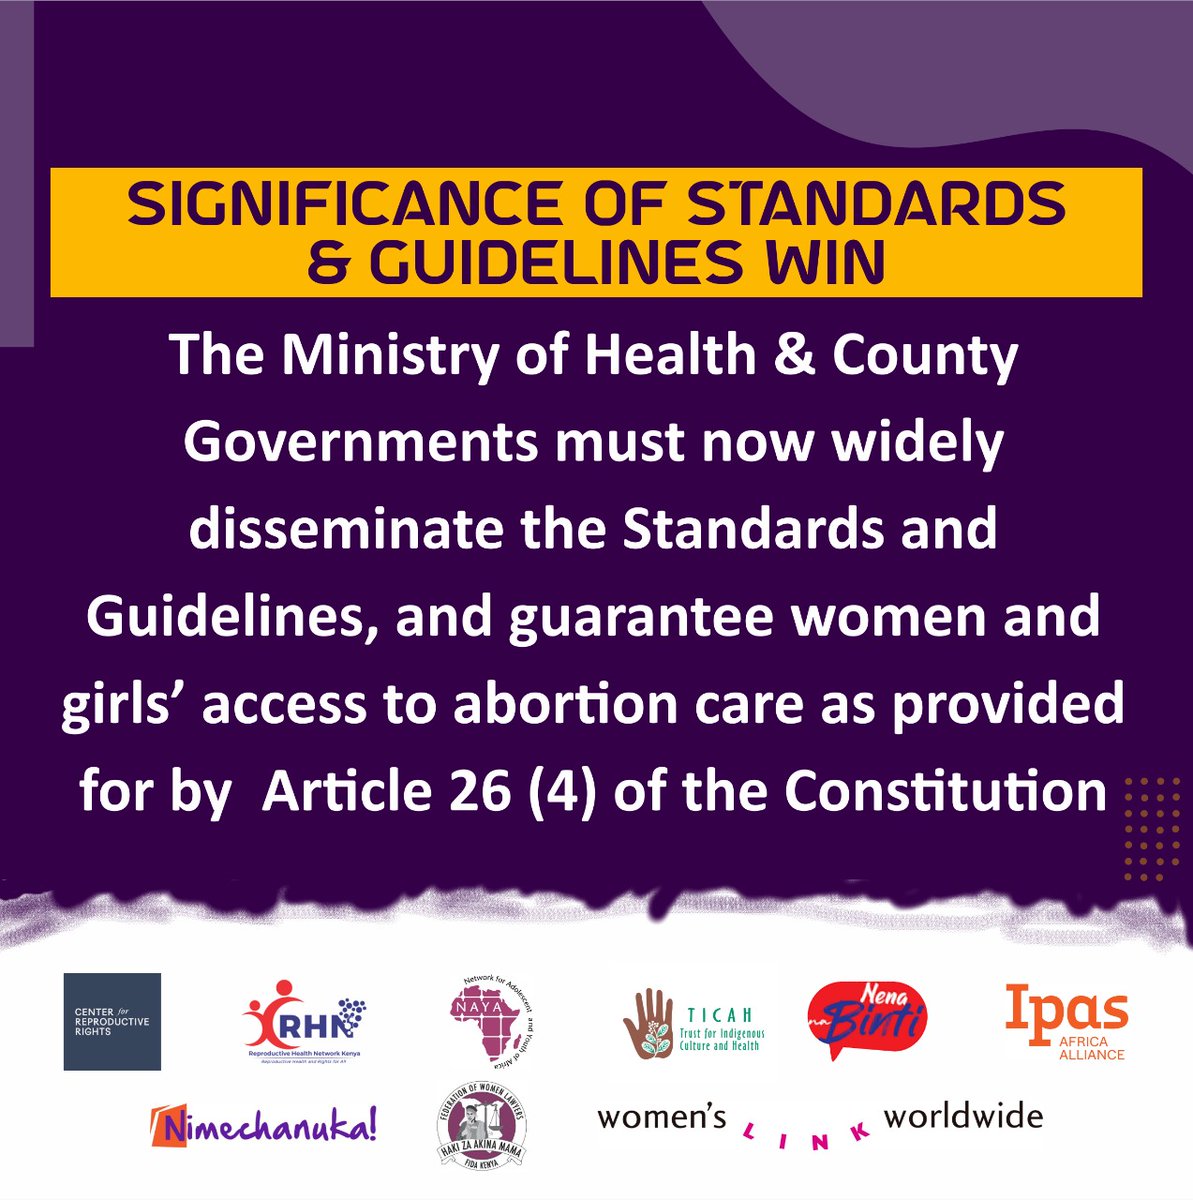 🗣️ The Ministry of Health (@MOH_Kenya) & County Governments must now widely disseminate the Standards and Guidelines, and guarantee access to abortion care as provided for by Article 26 (4) of the Constitution of #Kenya